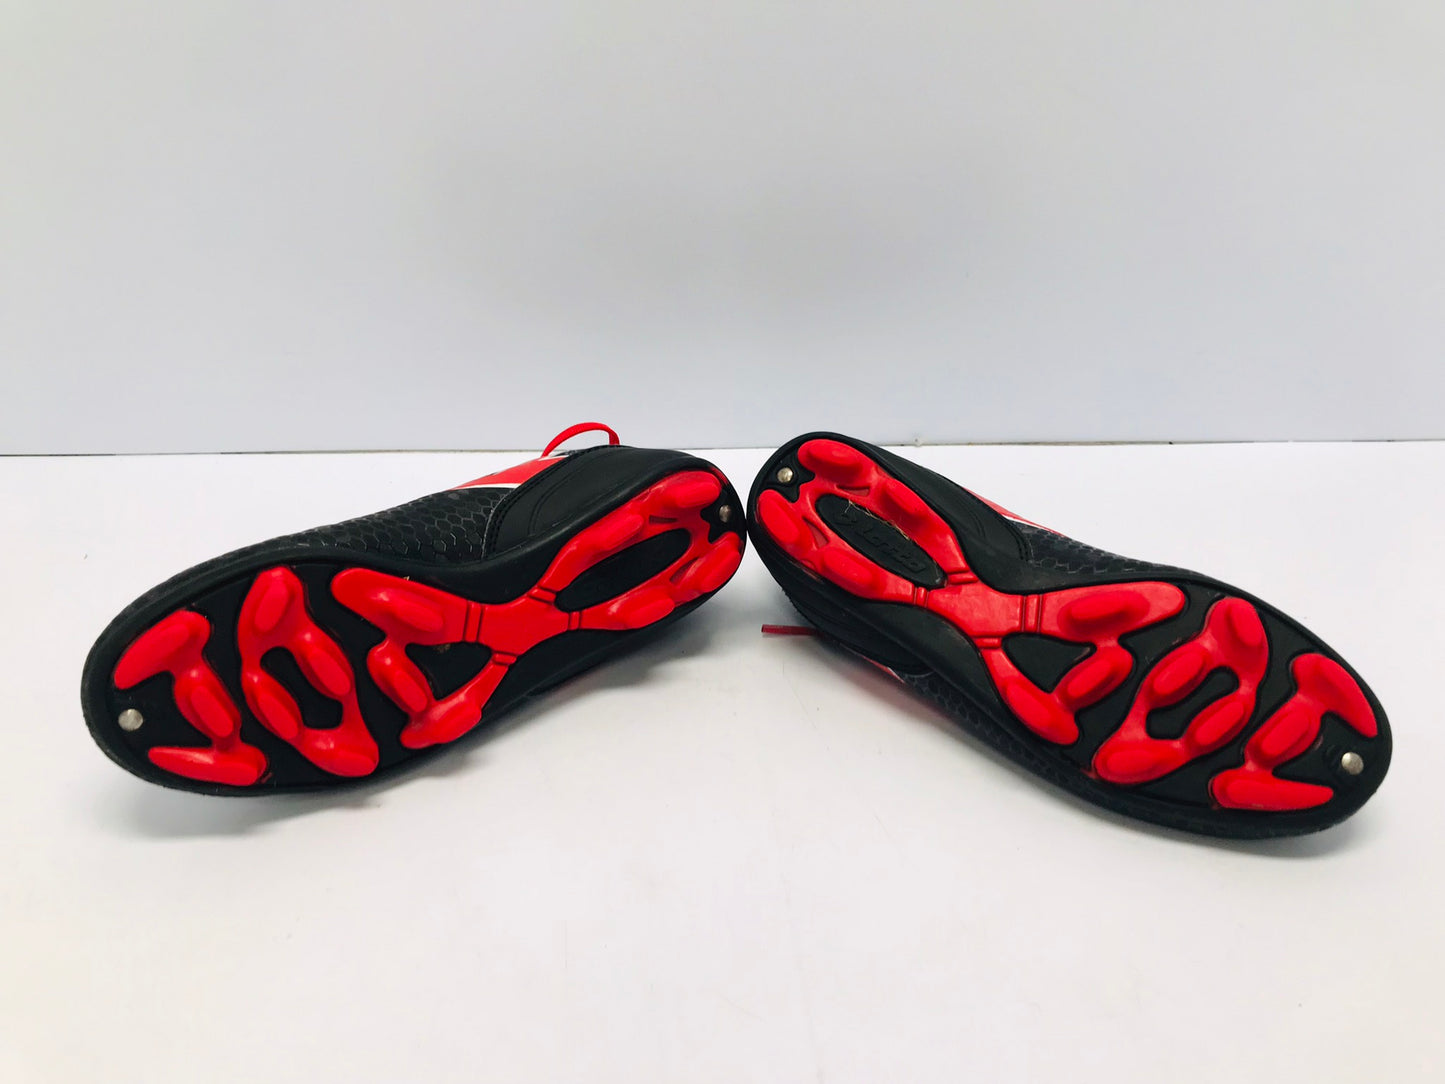 Soccer Shoes Cleats Child Size 1 Lotto Black Red